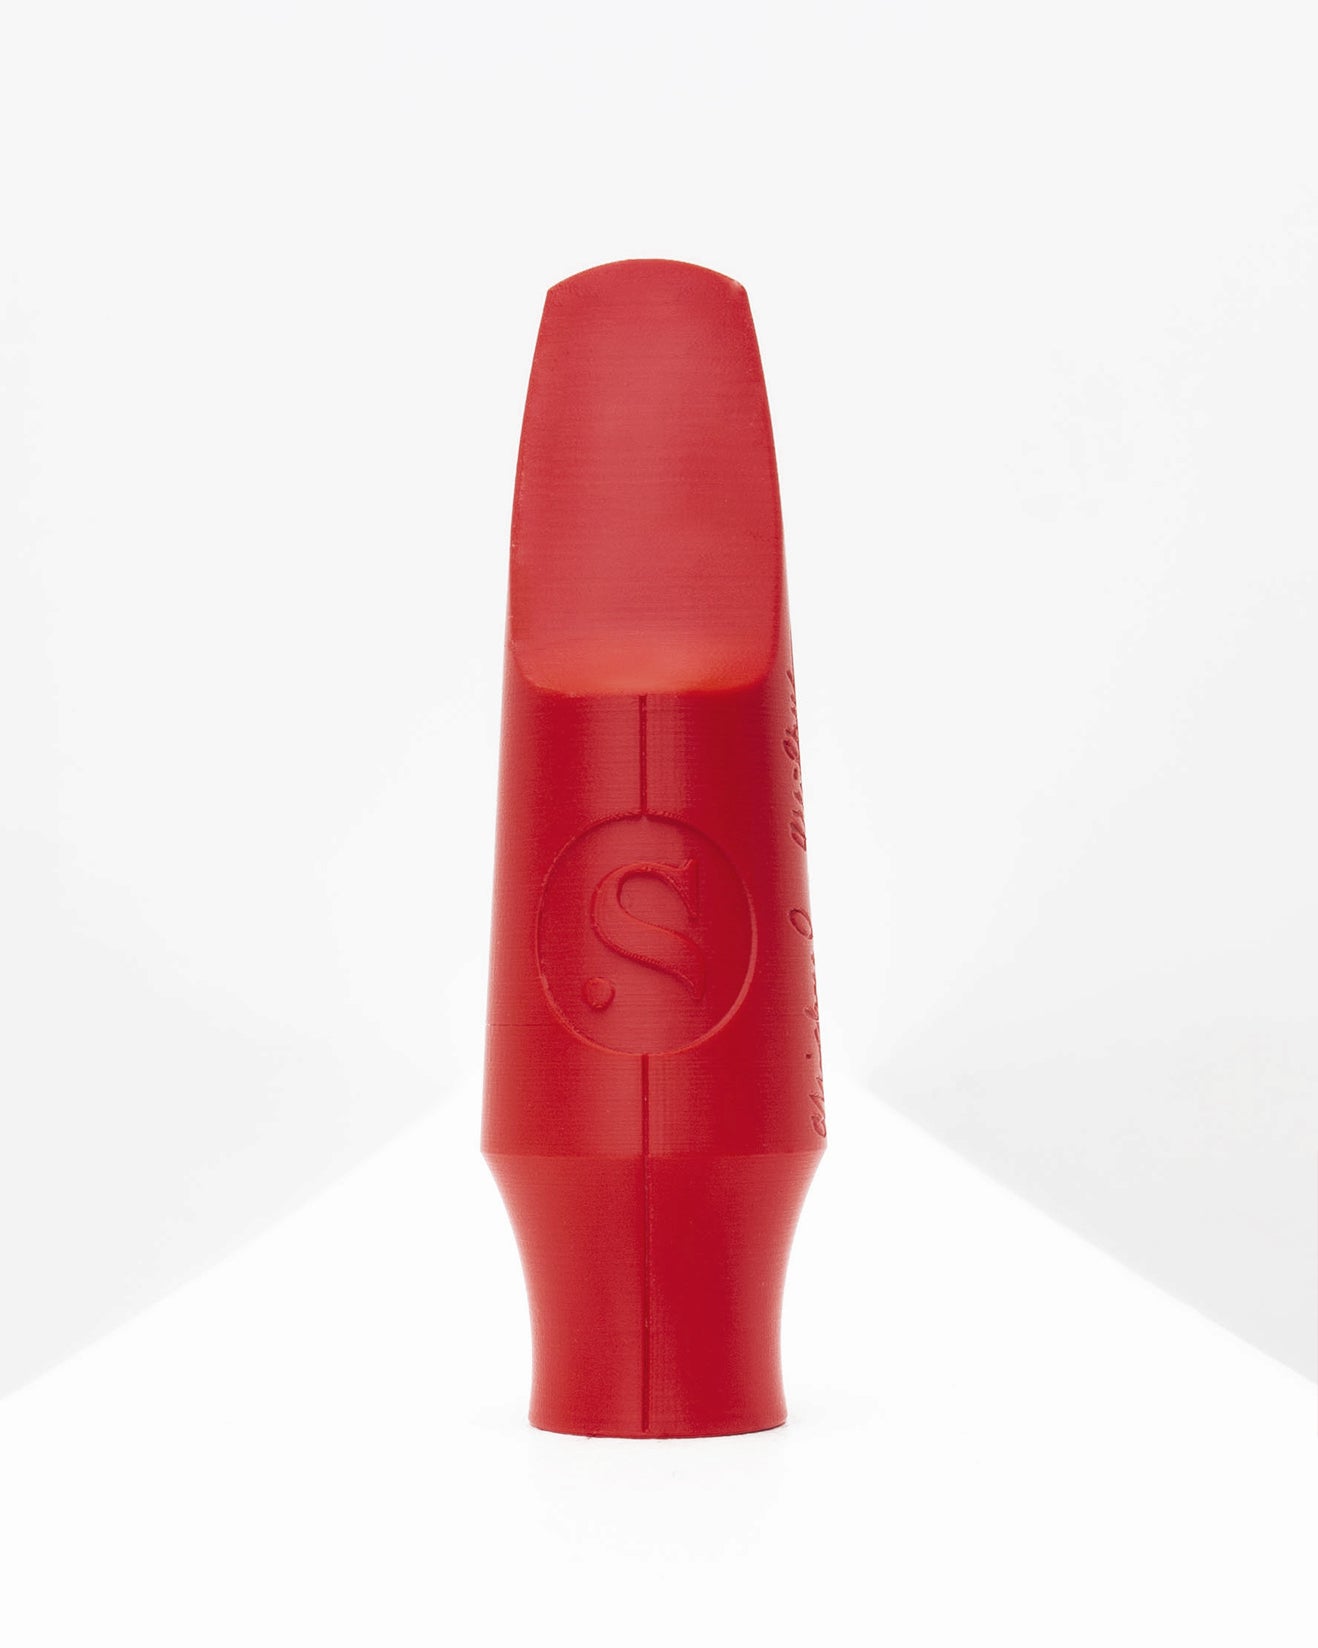 Tenor Originals Saxophone mouthpiece - Steady by Syos - 8 / Carmine Red